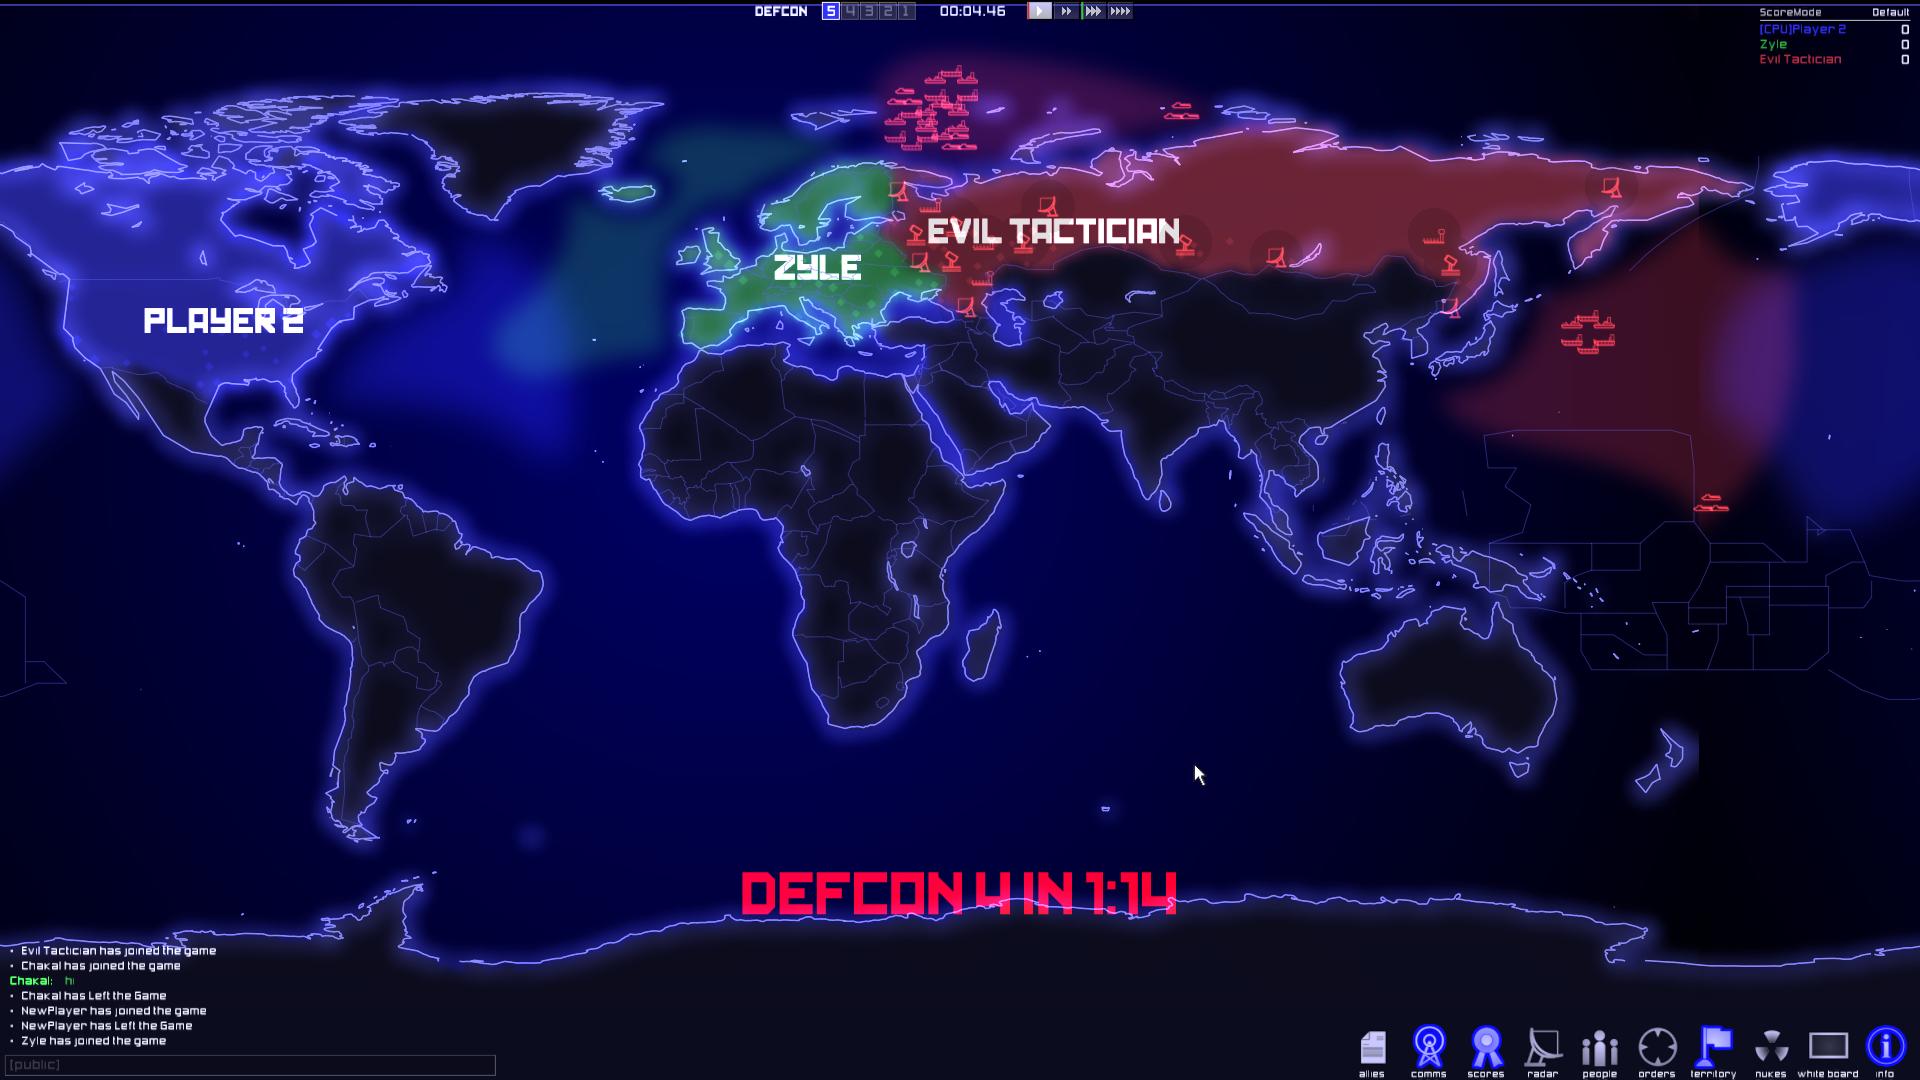 Defcons httpwwwmanapoolcoukdefcon review 1920x1080